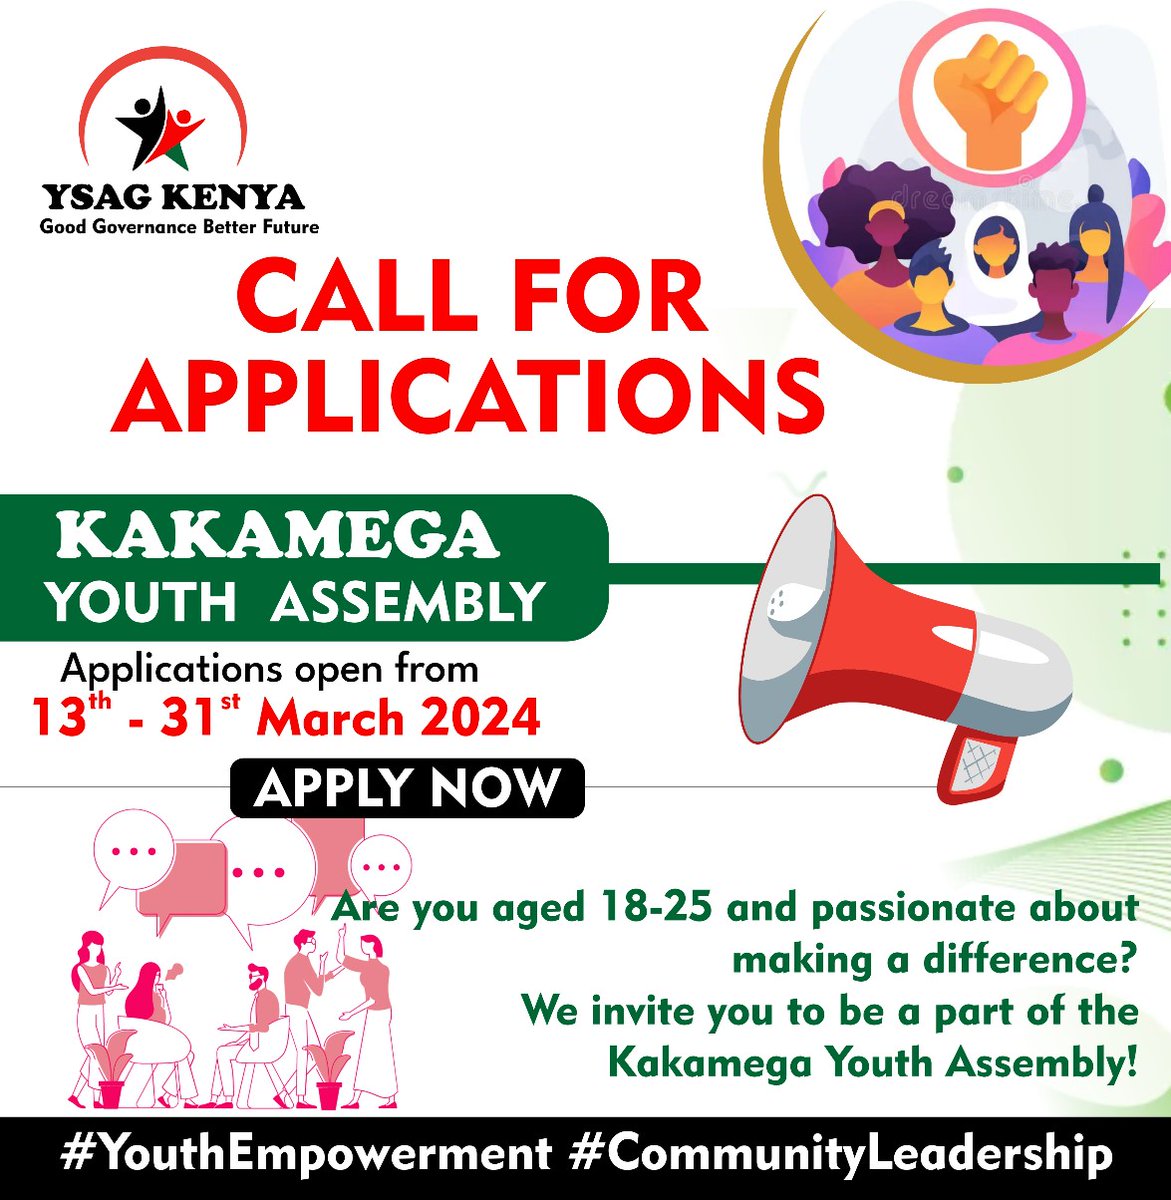 Are you a young individual residing in Kakamega with a fervent desire to initiate positive transformations within our communities? Embrace the opportunity to become a member of the Kakamega Youth Assembly as a Member of Parliament (MP). #YouthInGovervance @YSAGKenya @conradkeyah